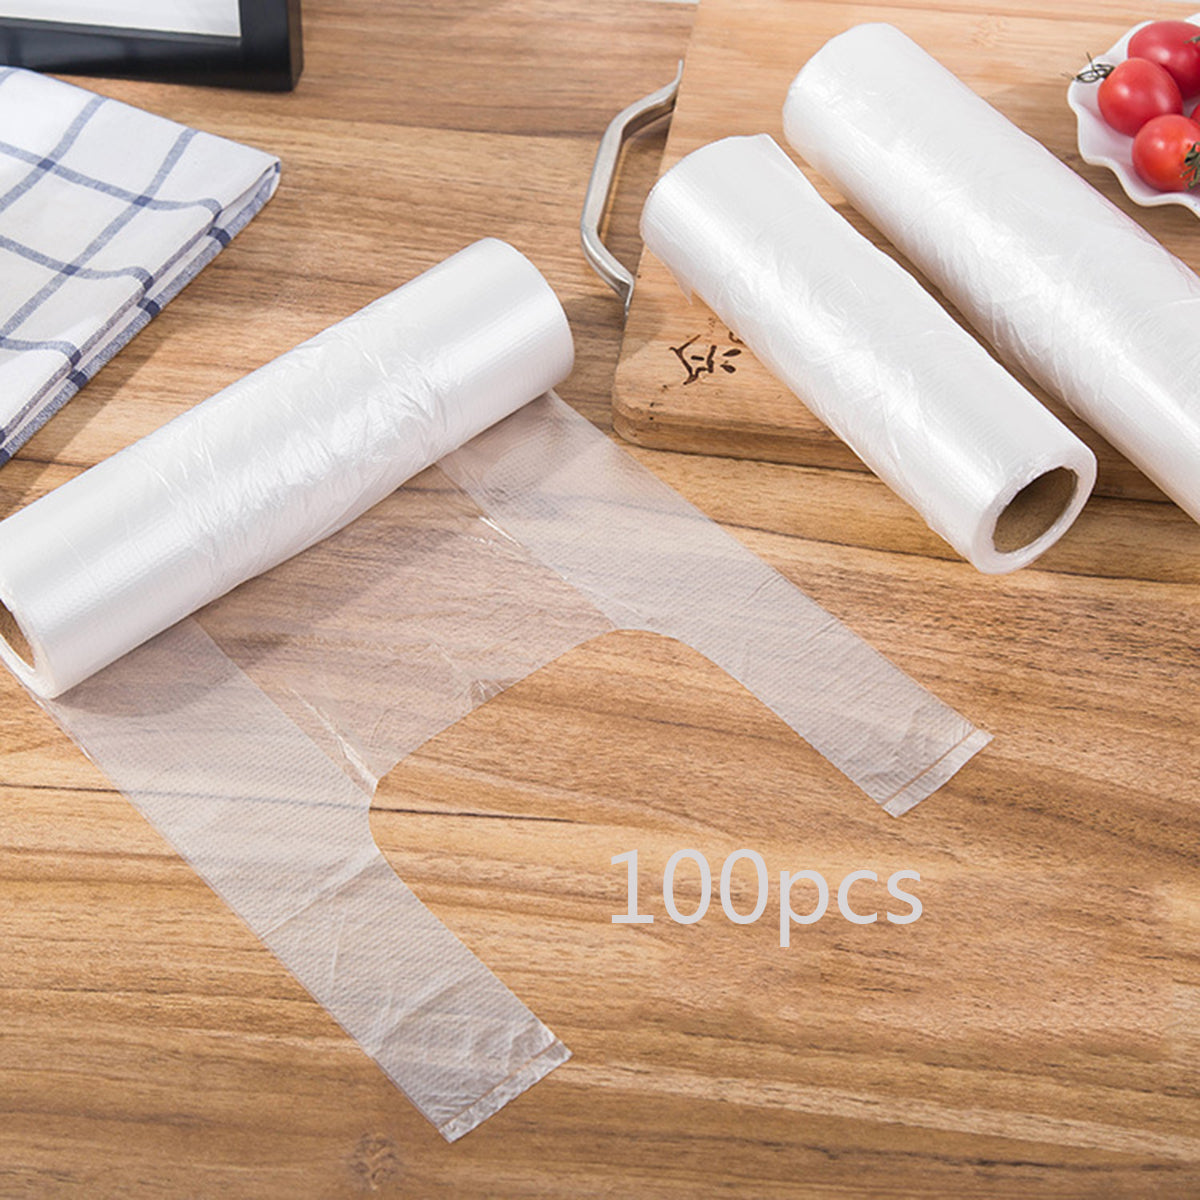 100-pack Food and Fridge Freezer Bags Rolls Clear Plastic Bag Disposable Thickened Vest-style Fresh-keeping Bag with Tie Handles